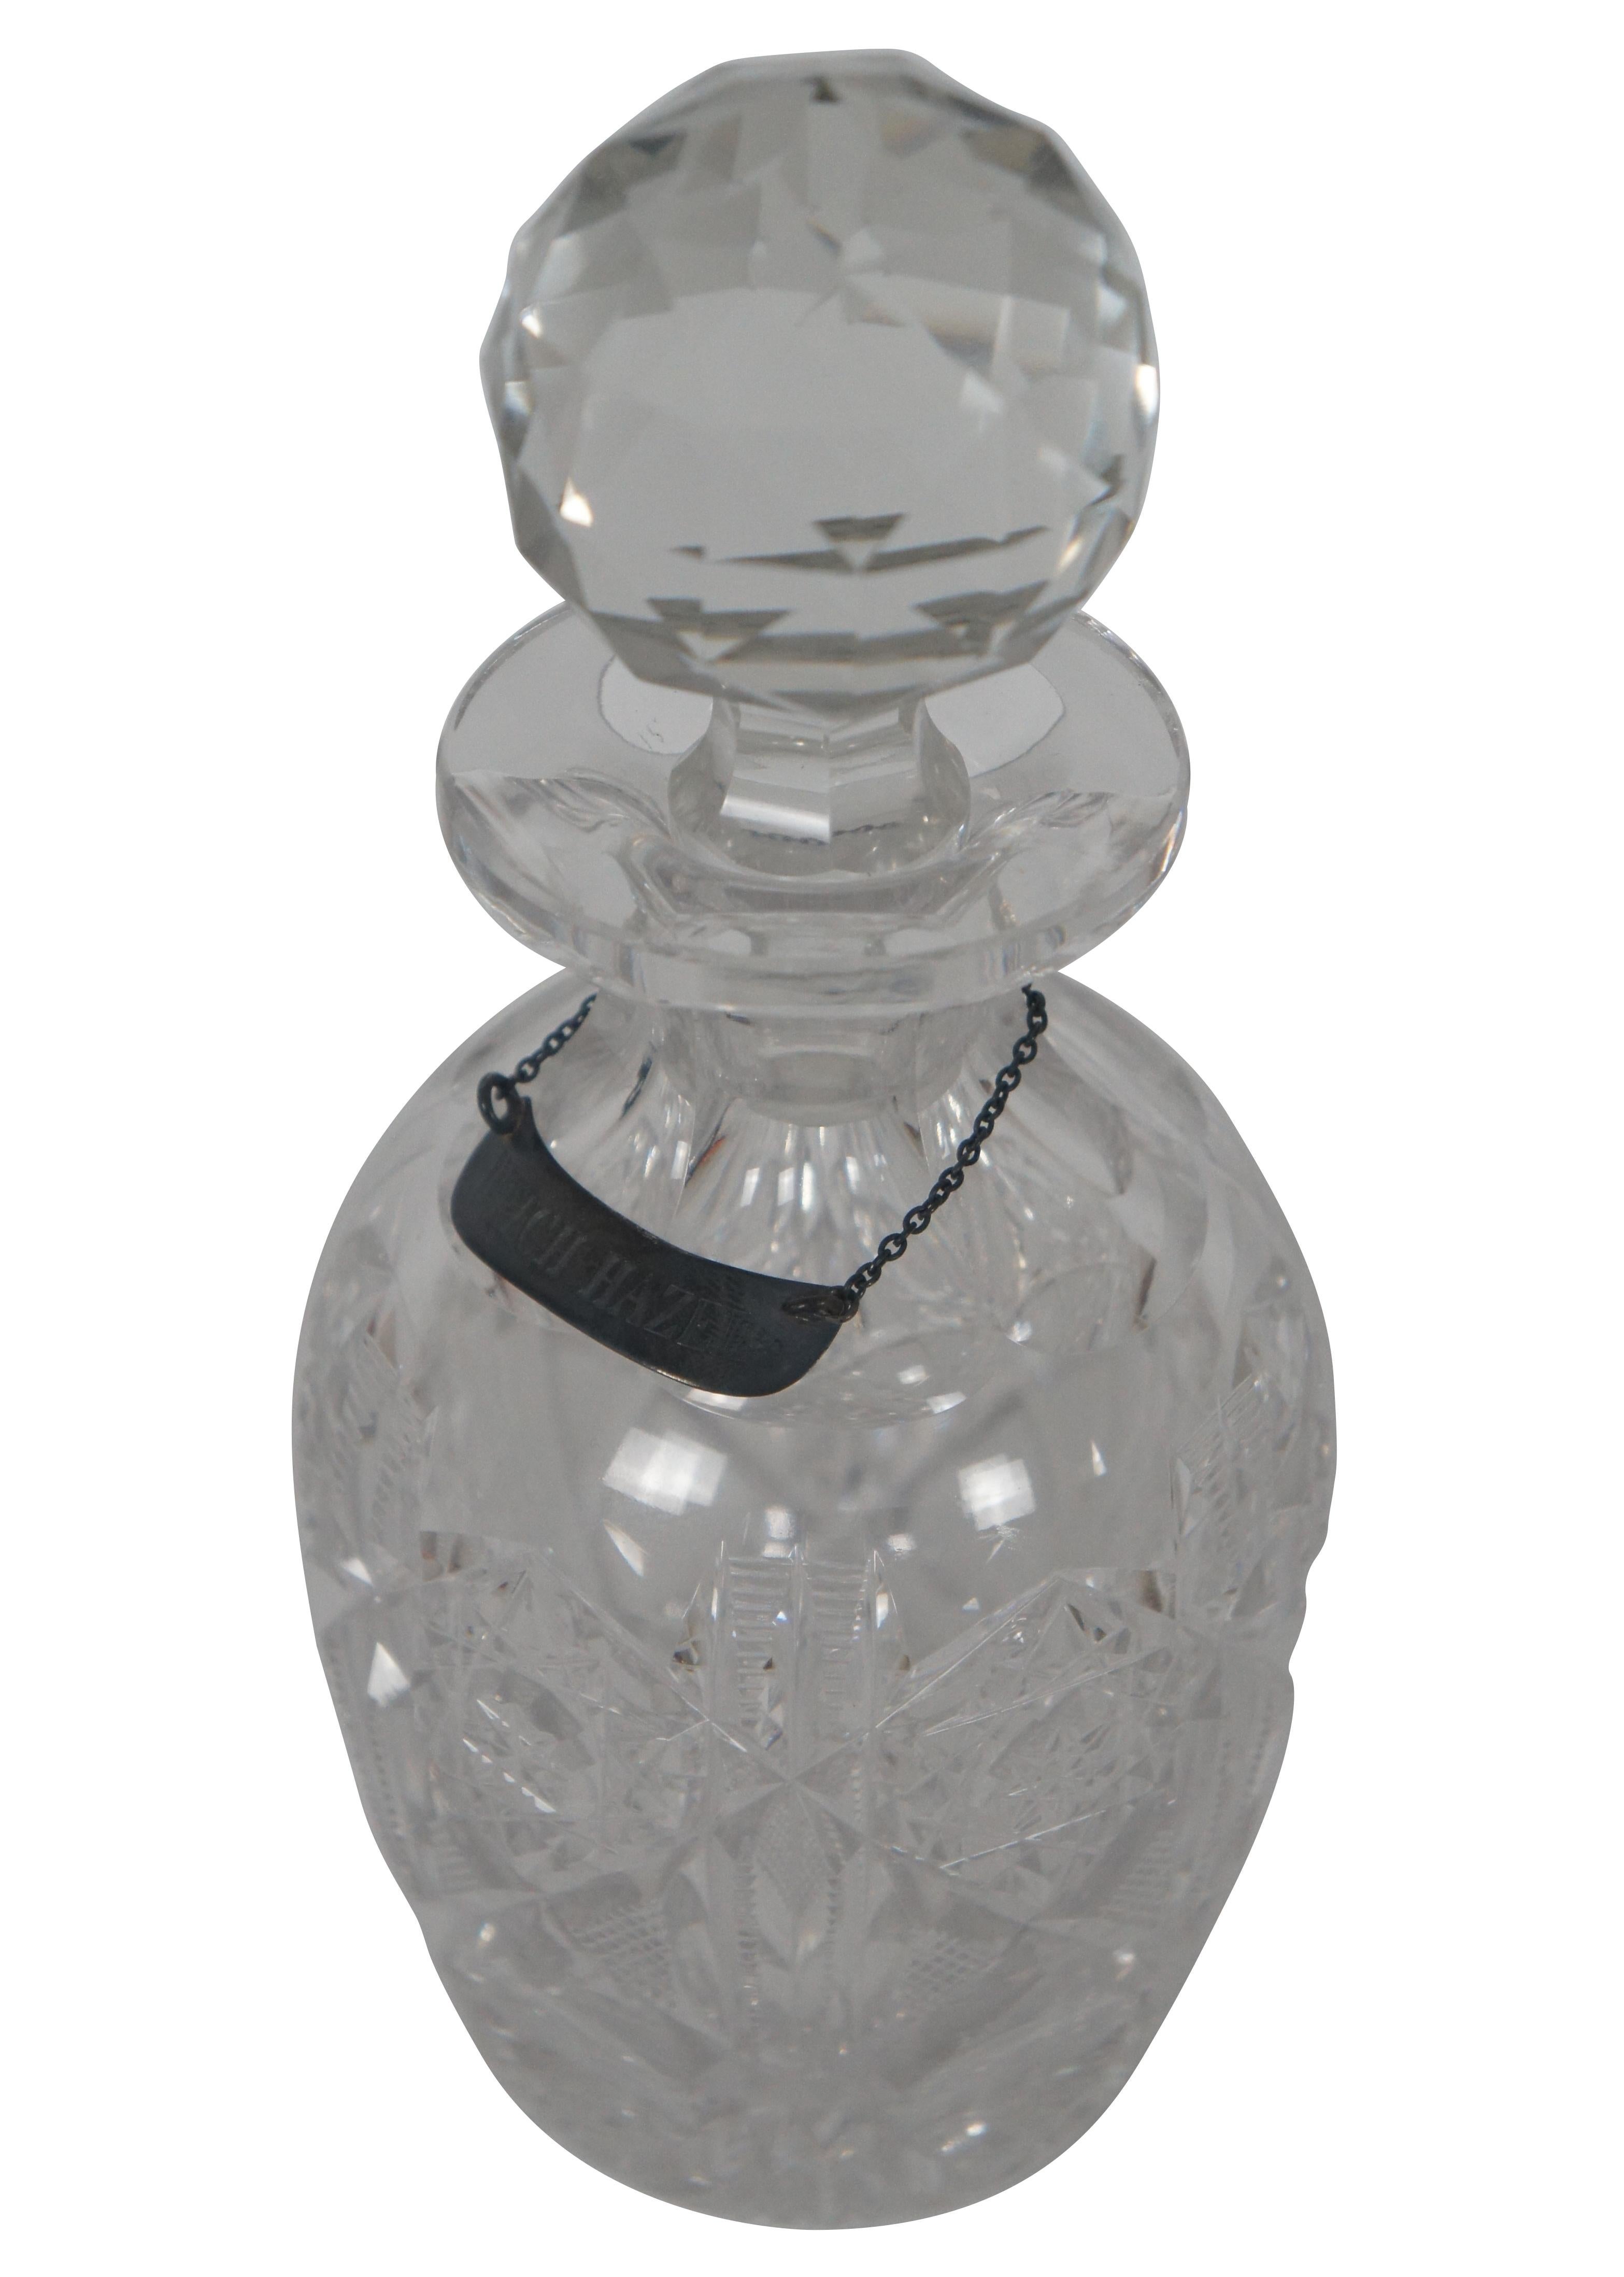 Antique cut glass vanity bottle and stopper with metal label marking the bottle for witch hazel, a popular astringent.